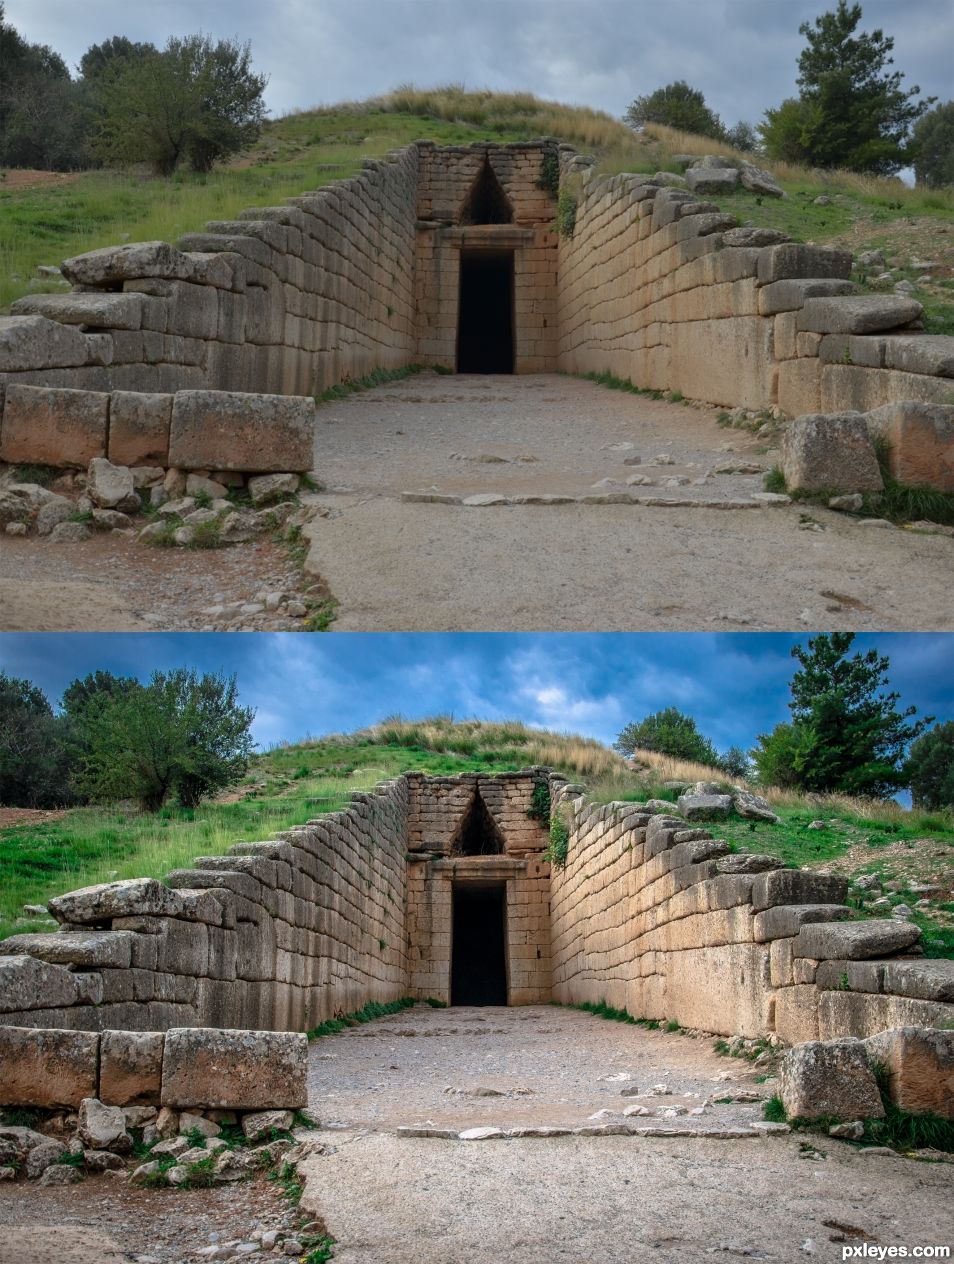 Creation of Treasury of Atreus - Tomb of Agamemnon: Final Result